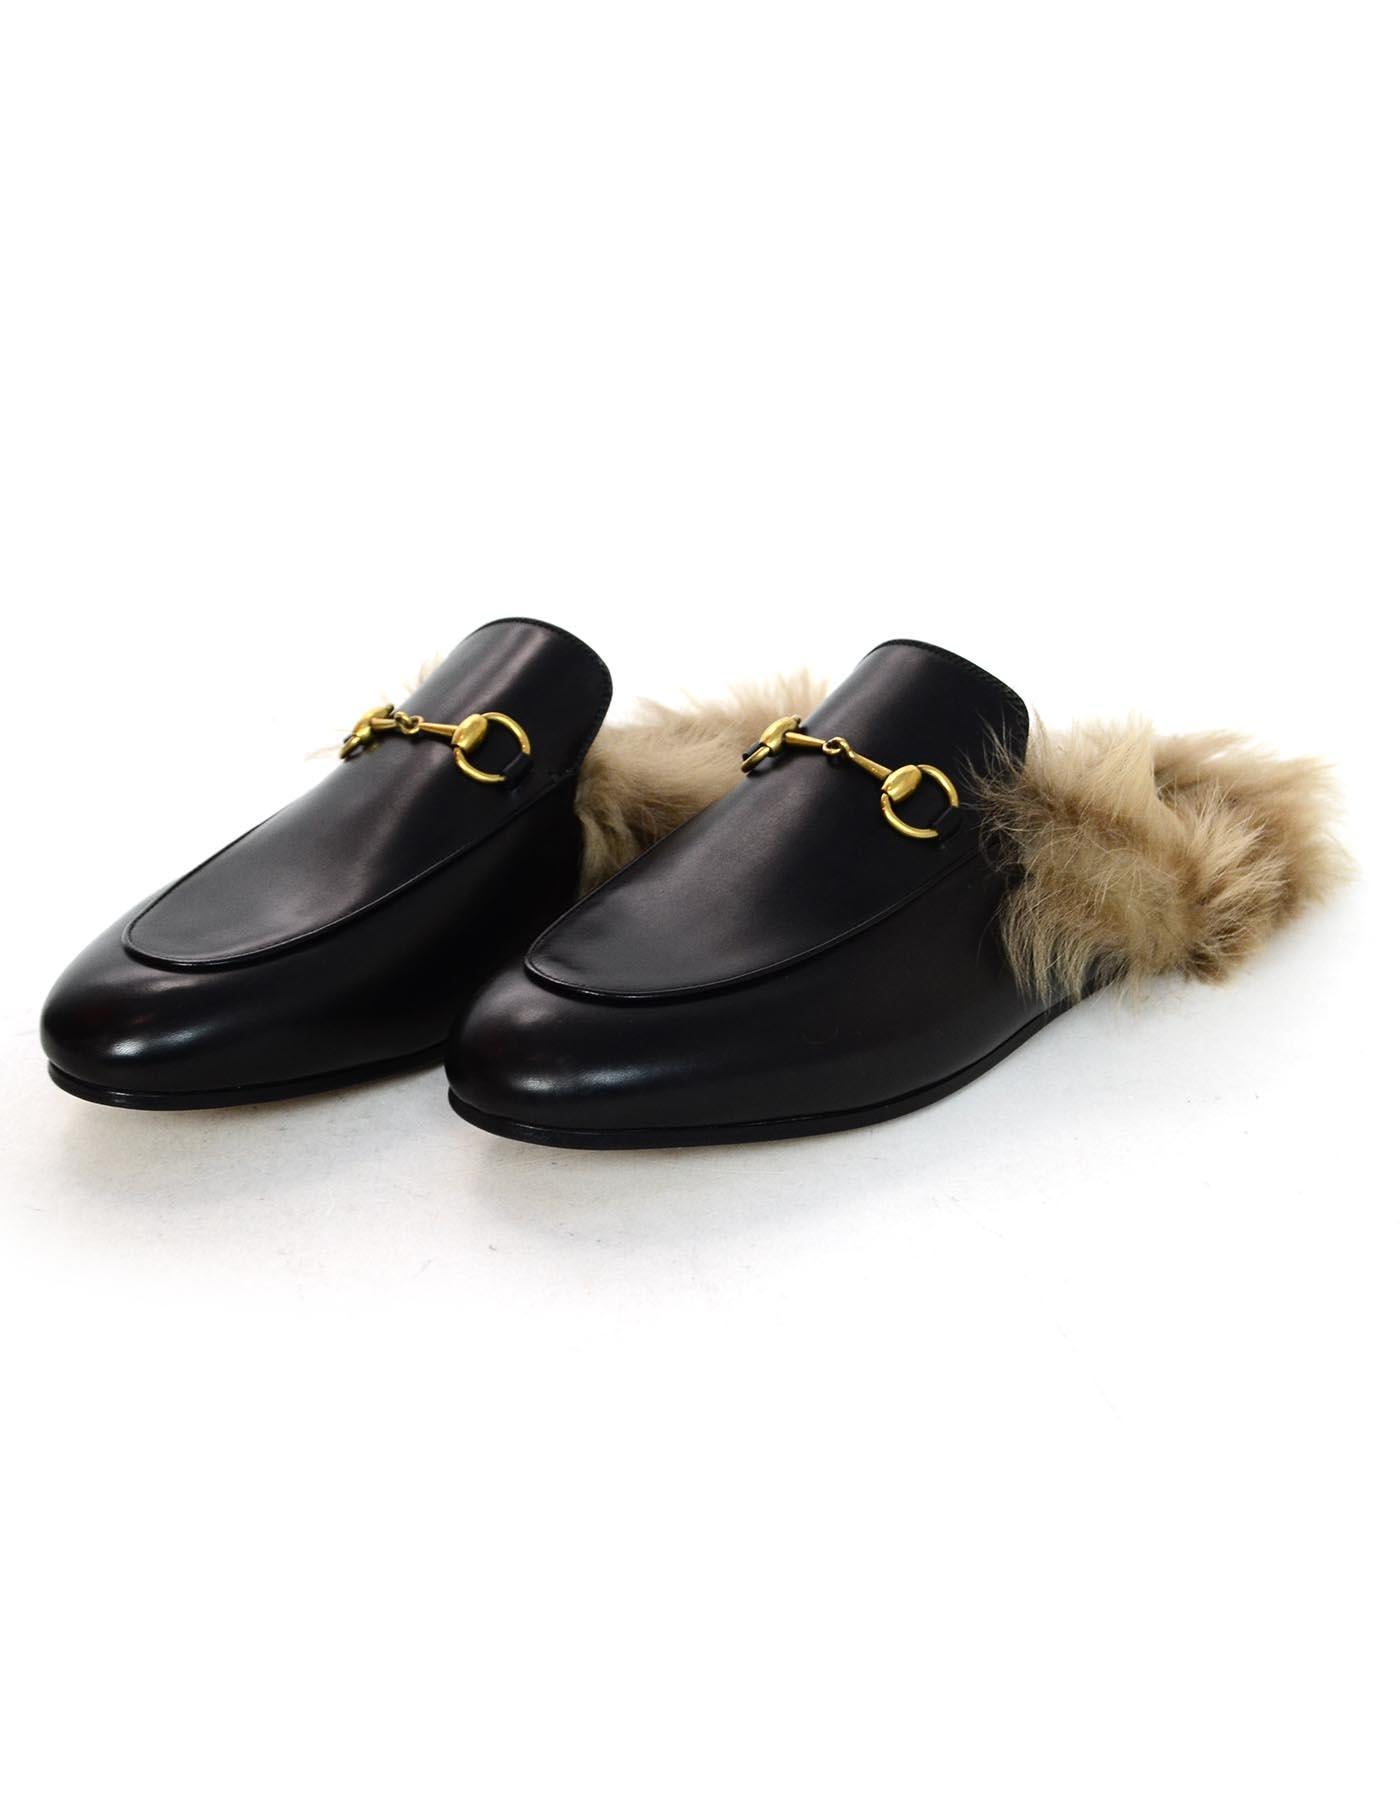 Gucci New Black Leather Princetown Slippers W/ Lamb Fur & Brass Horsebit Sz 39.5

Made In: Italy
Color: Black, taupe 
Hardware: Brass
Materials: Leather, lamb fur, metal
Closure/Opening:  Slide on
Overall Condition: Like new condition with exception